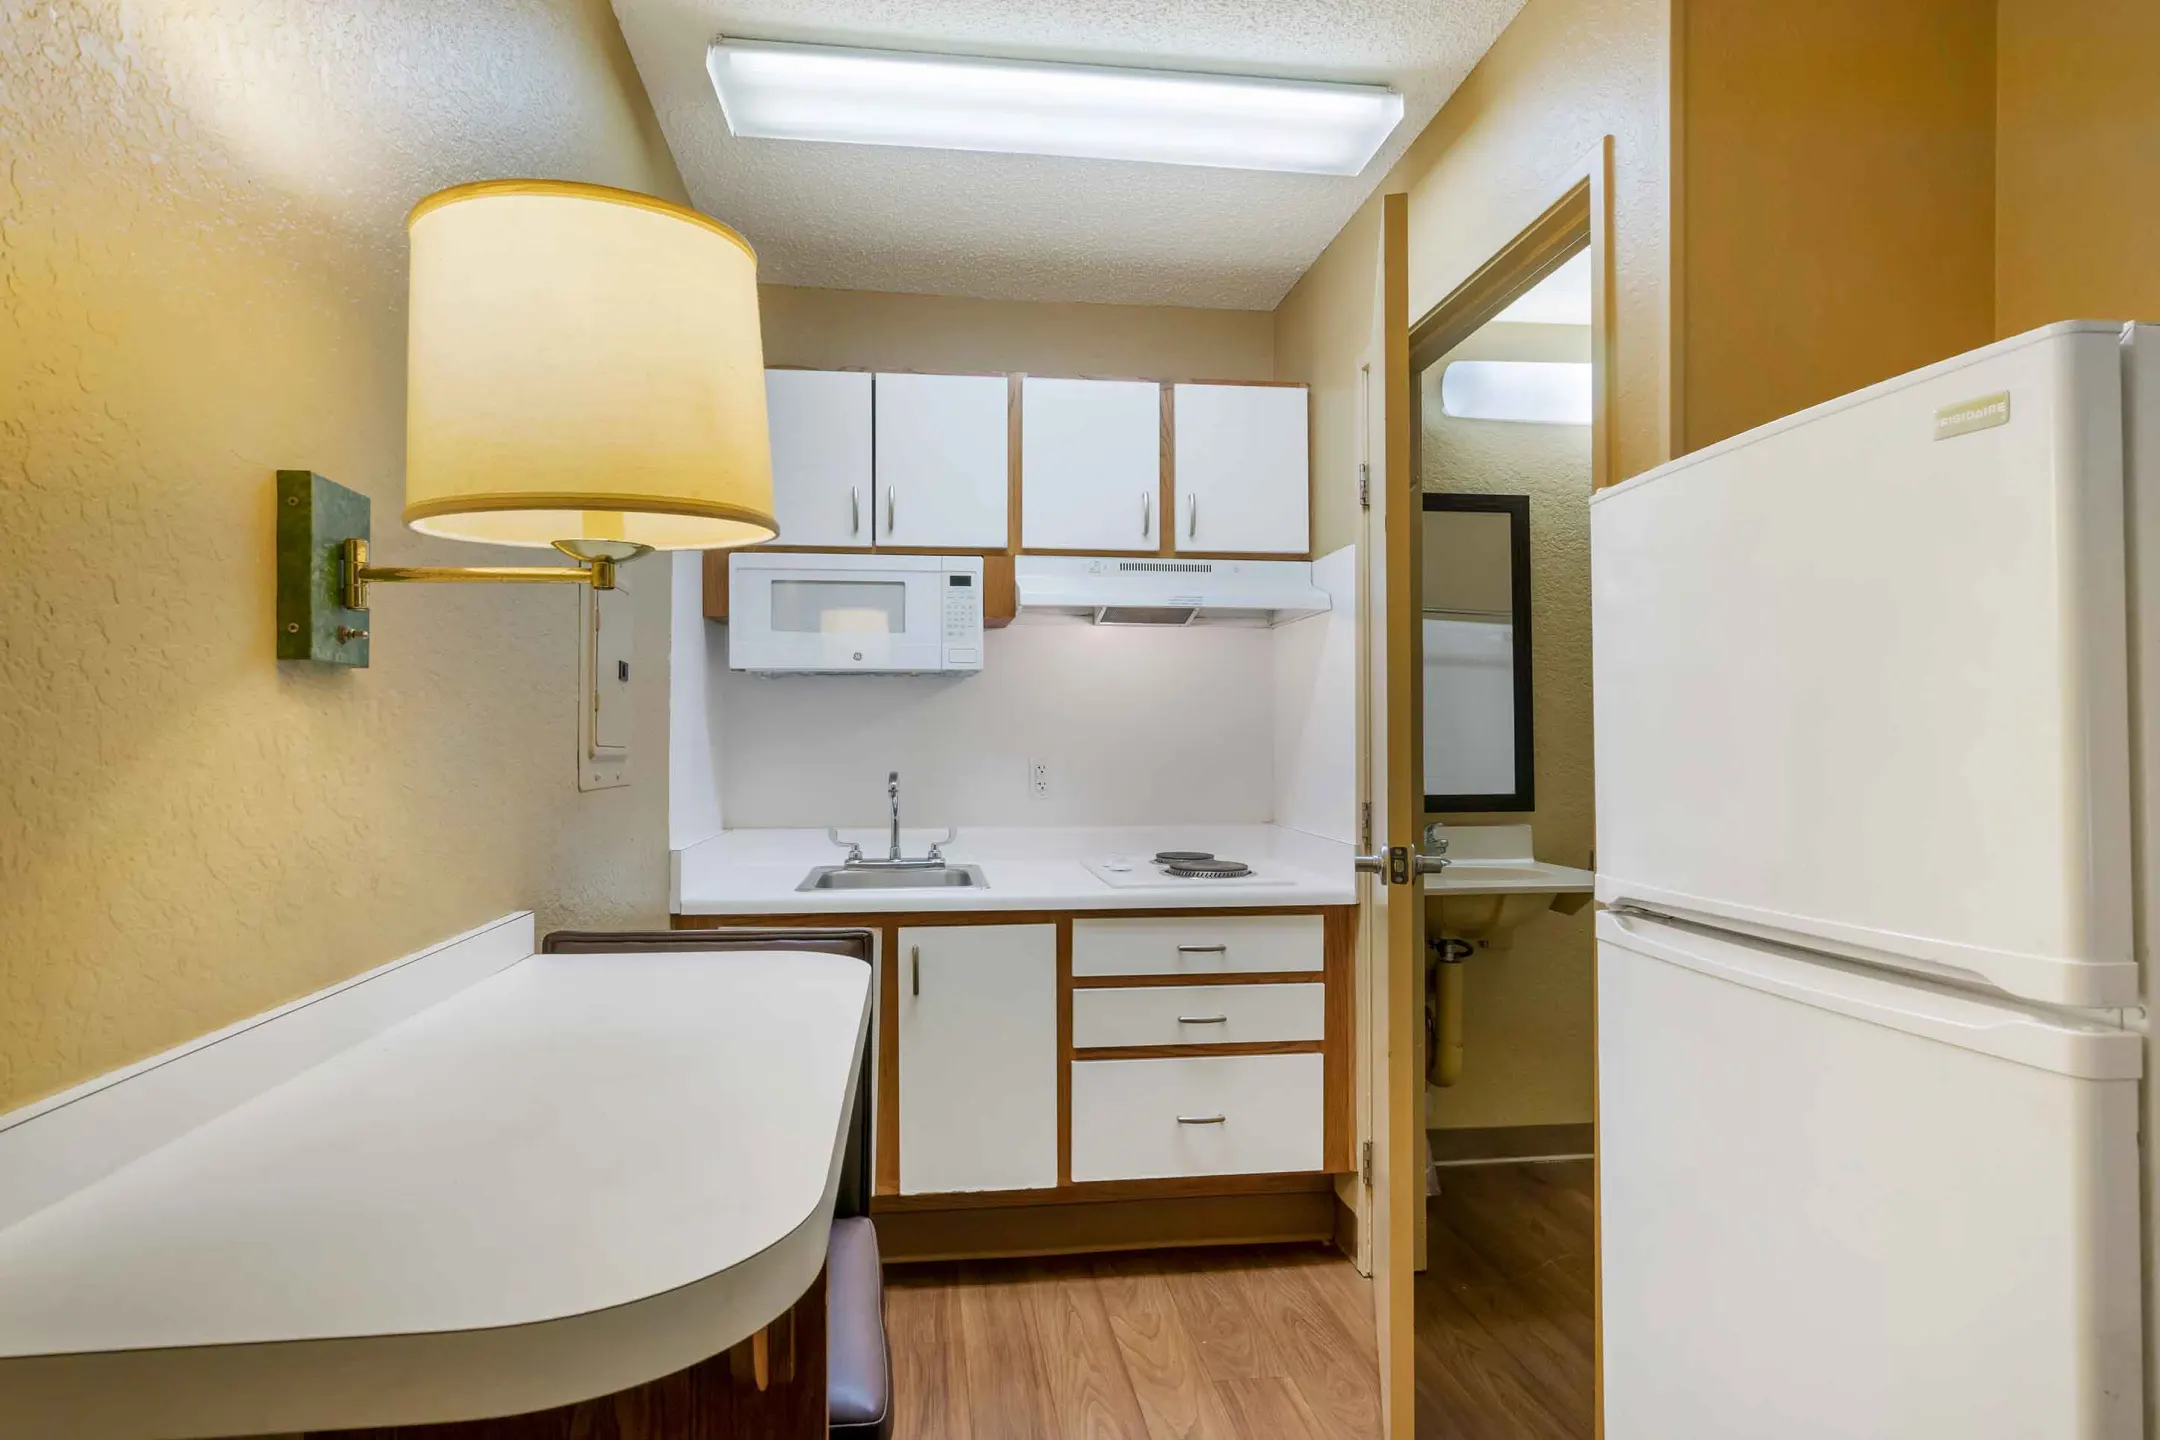 Kitchen - Furnished Studio - Clearwater - Carillon Park - Clearwater, FL